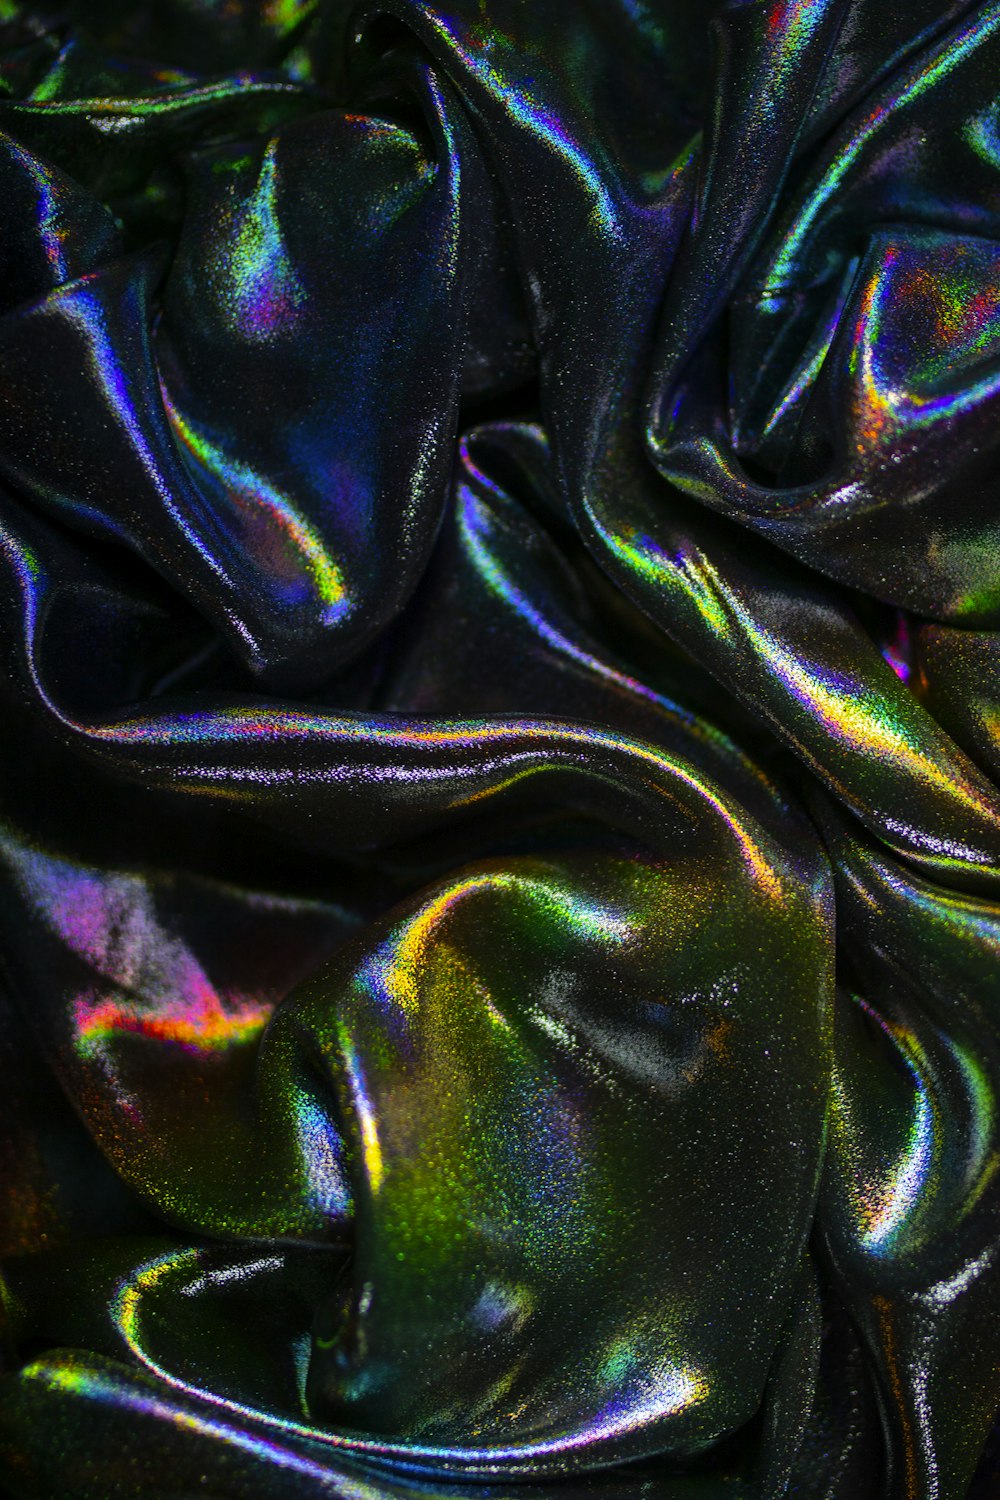 a close up view of a shiny material